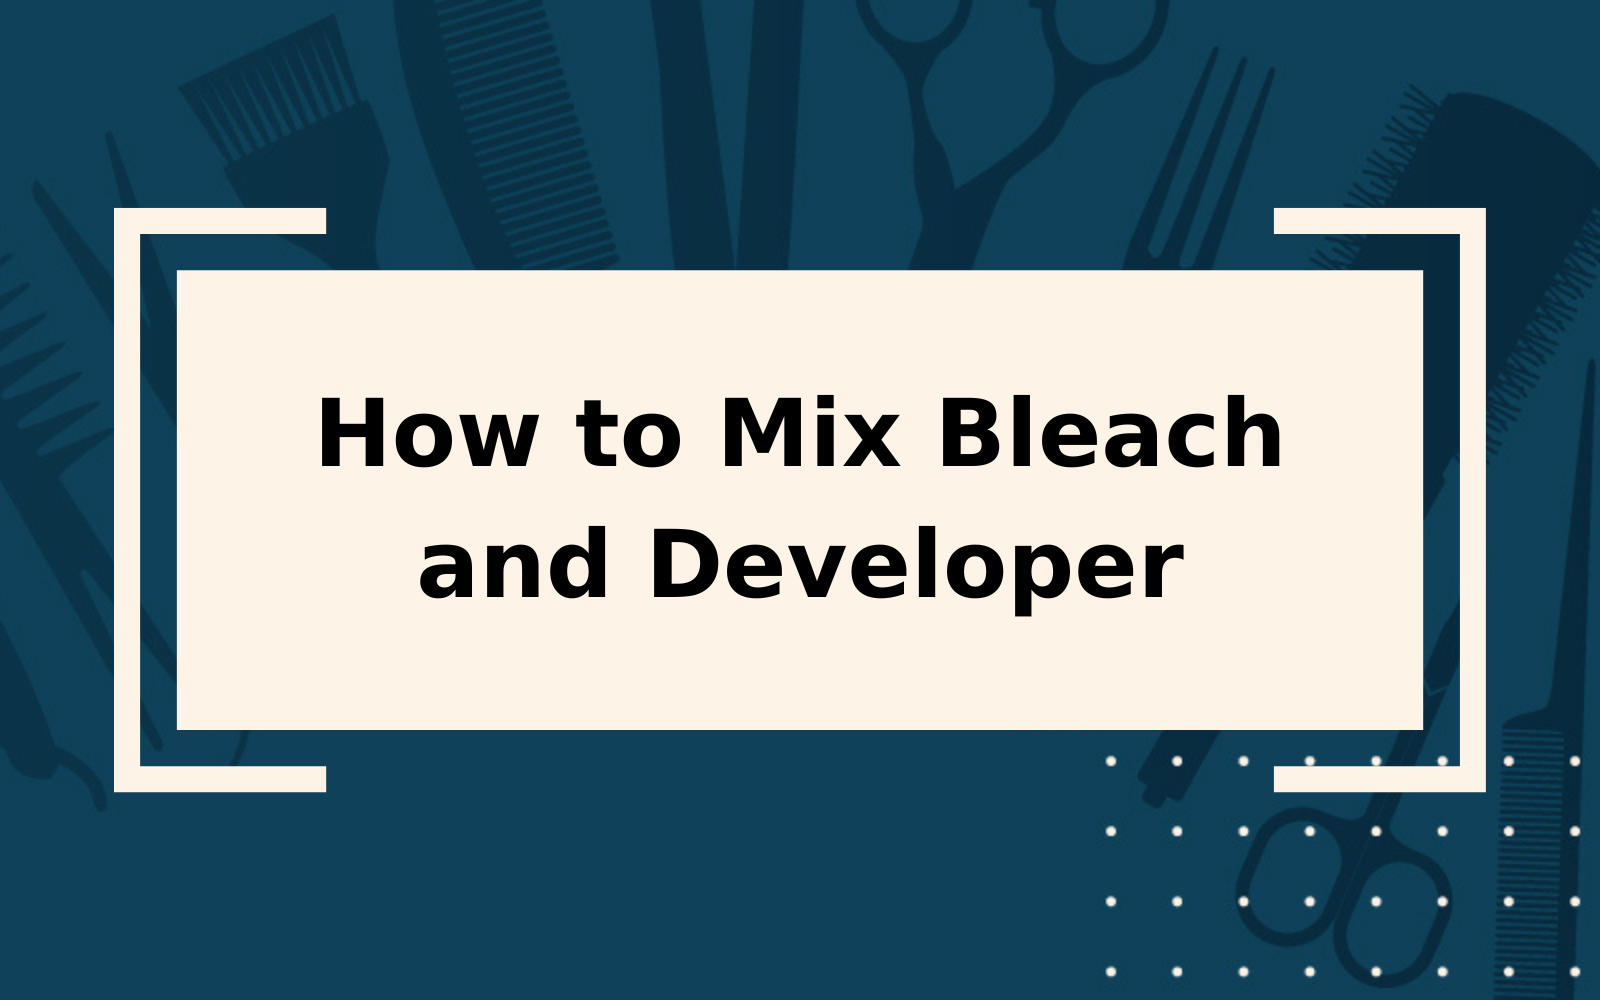 How to Mix Bleach and Developer | 9 Easy Steps